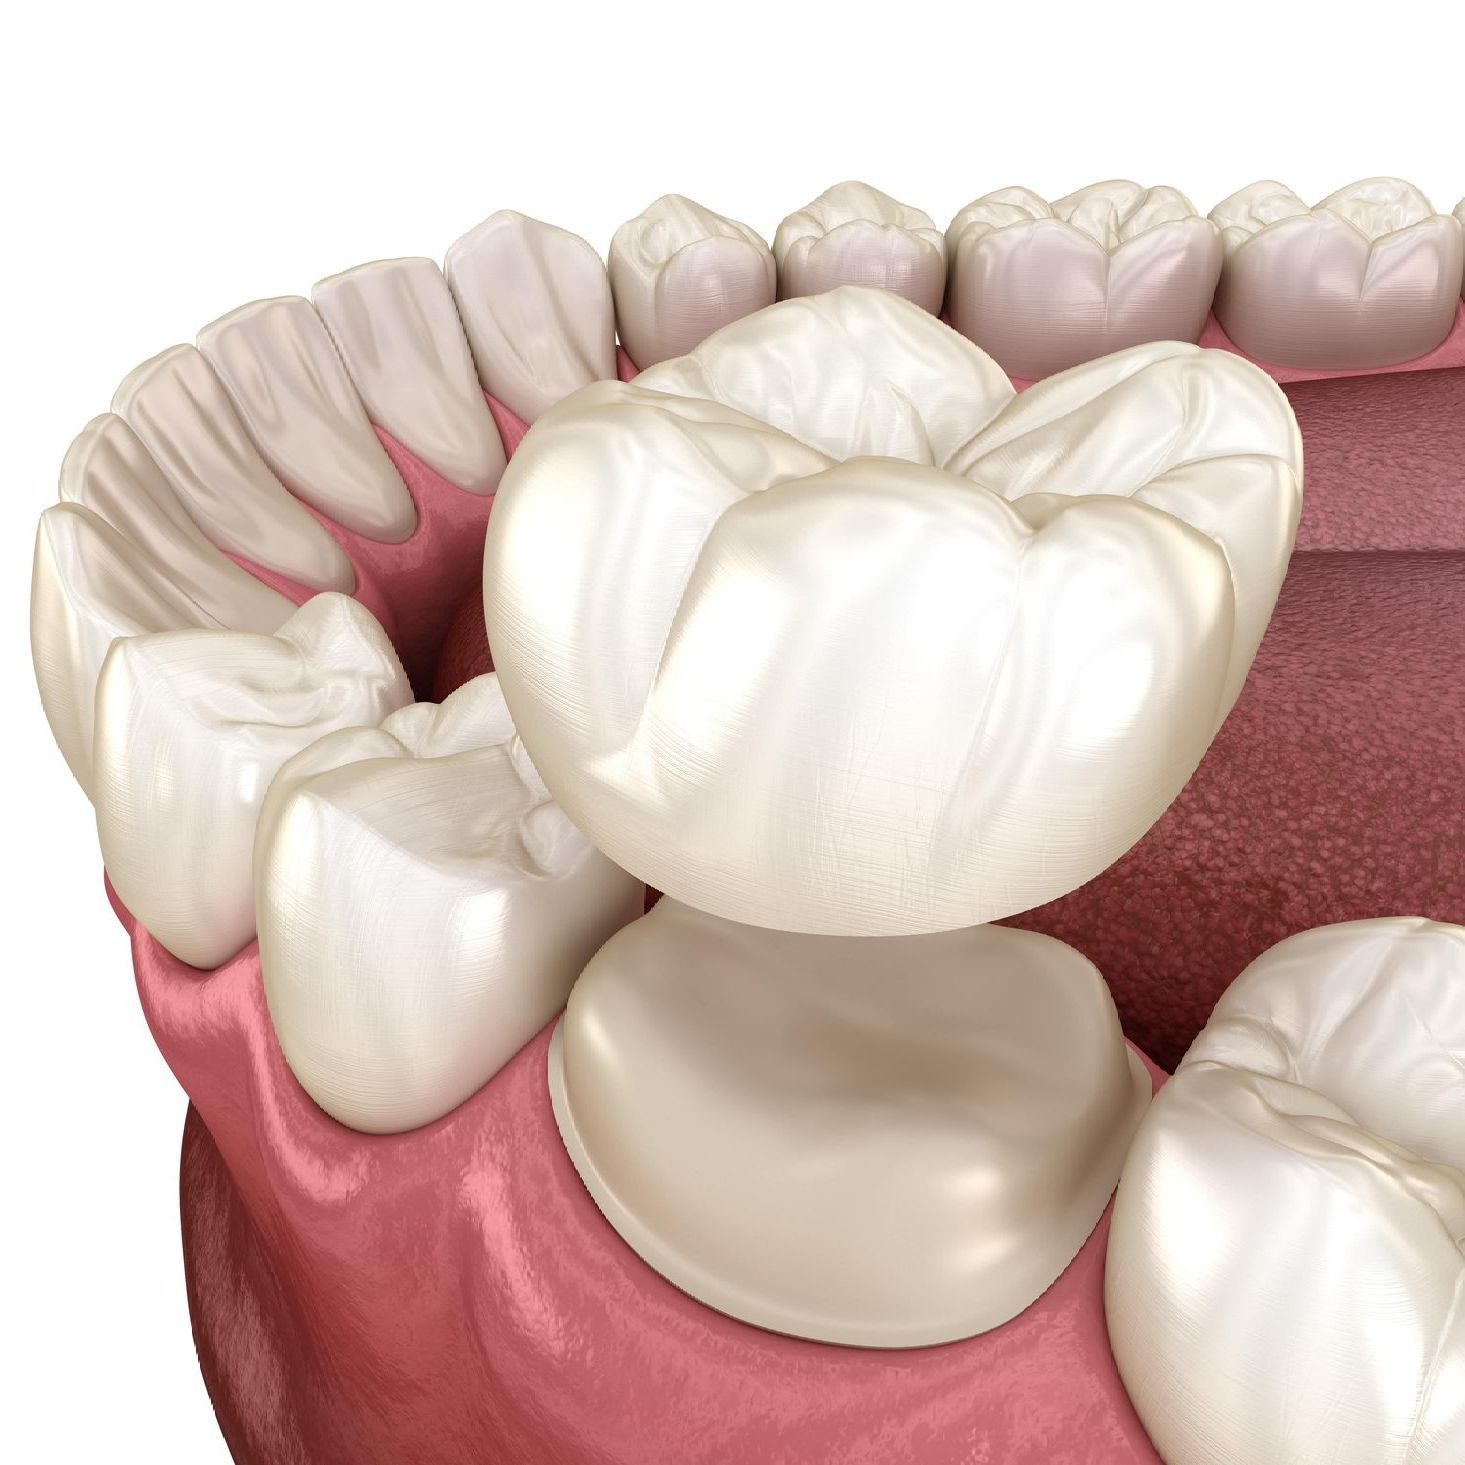 A computer generated image of a dental crown above the tooth